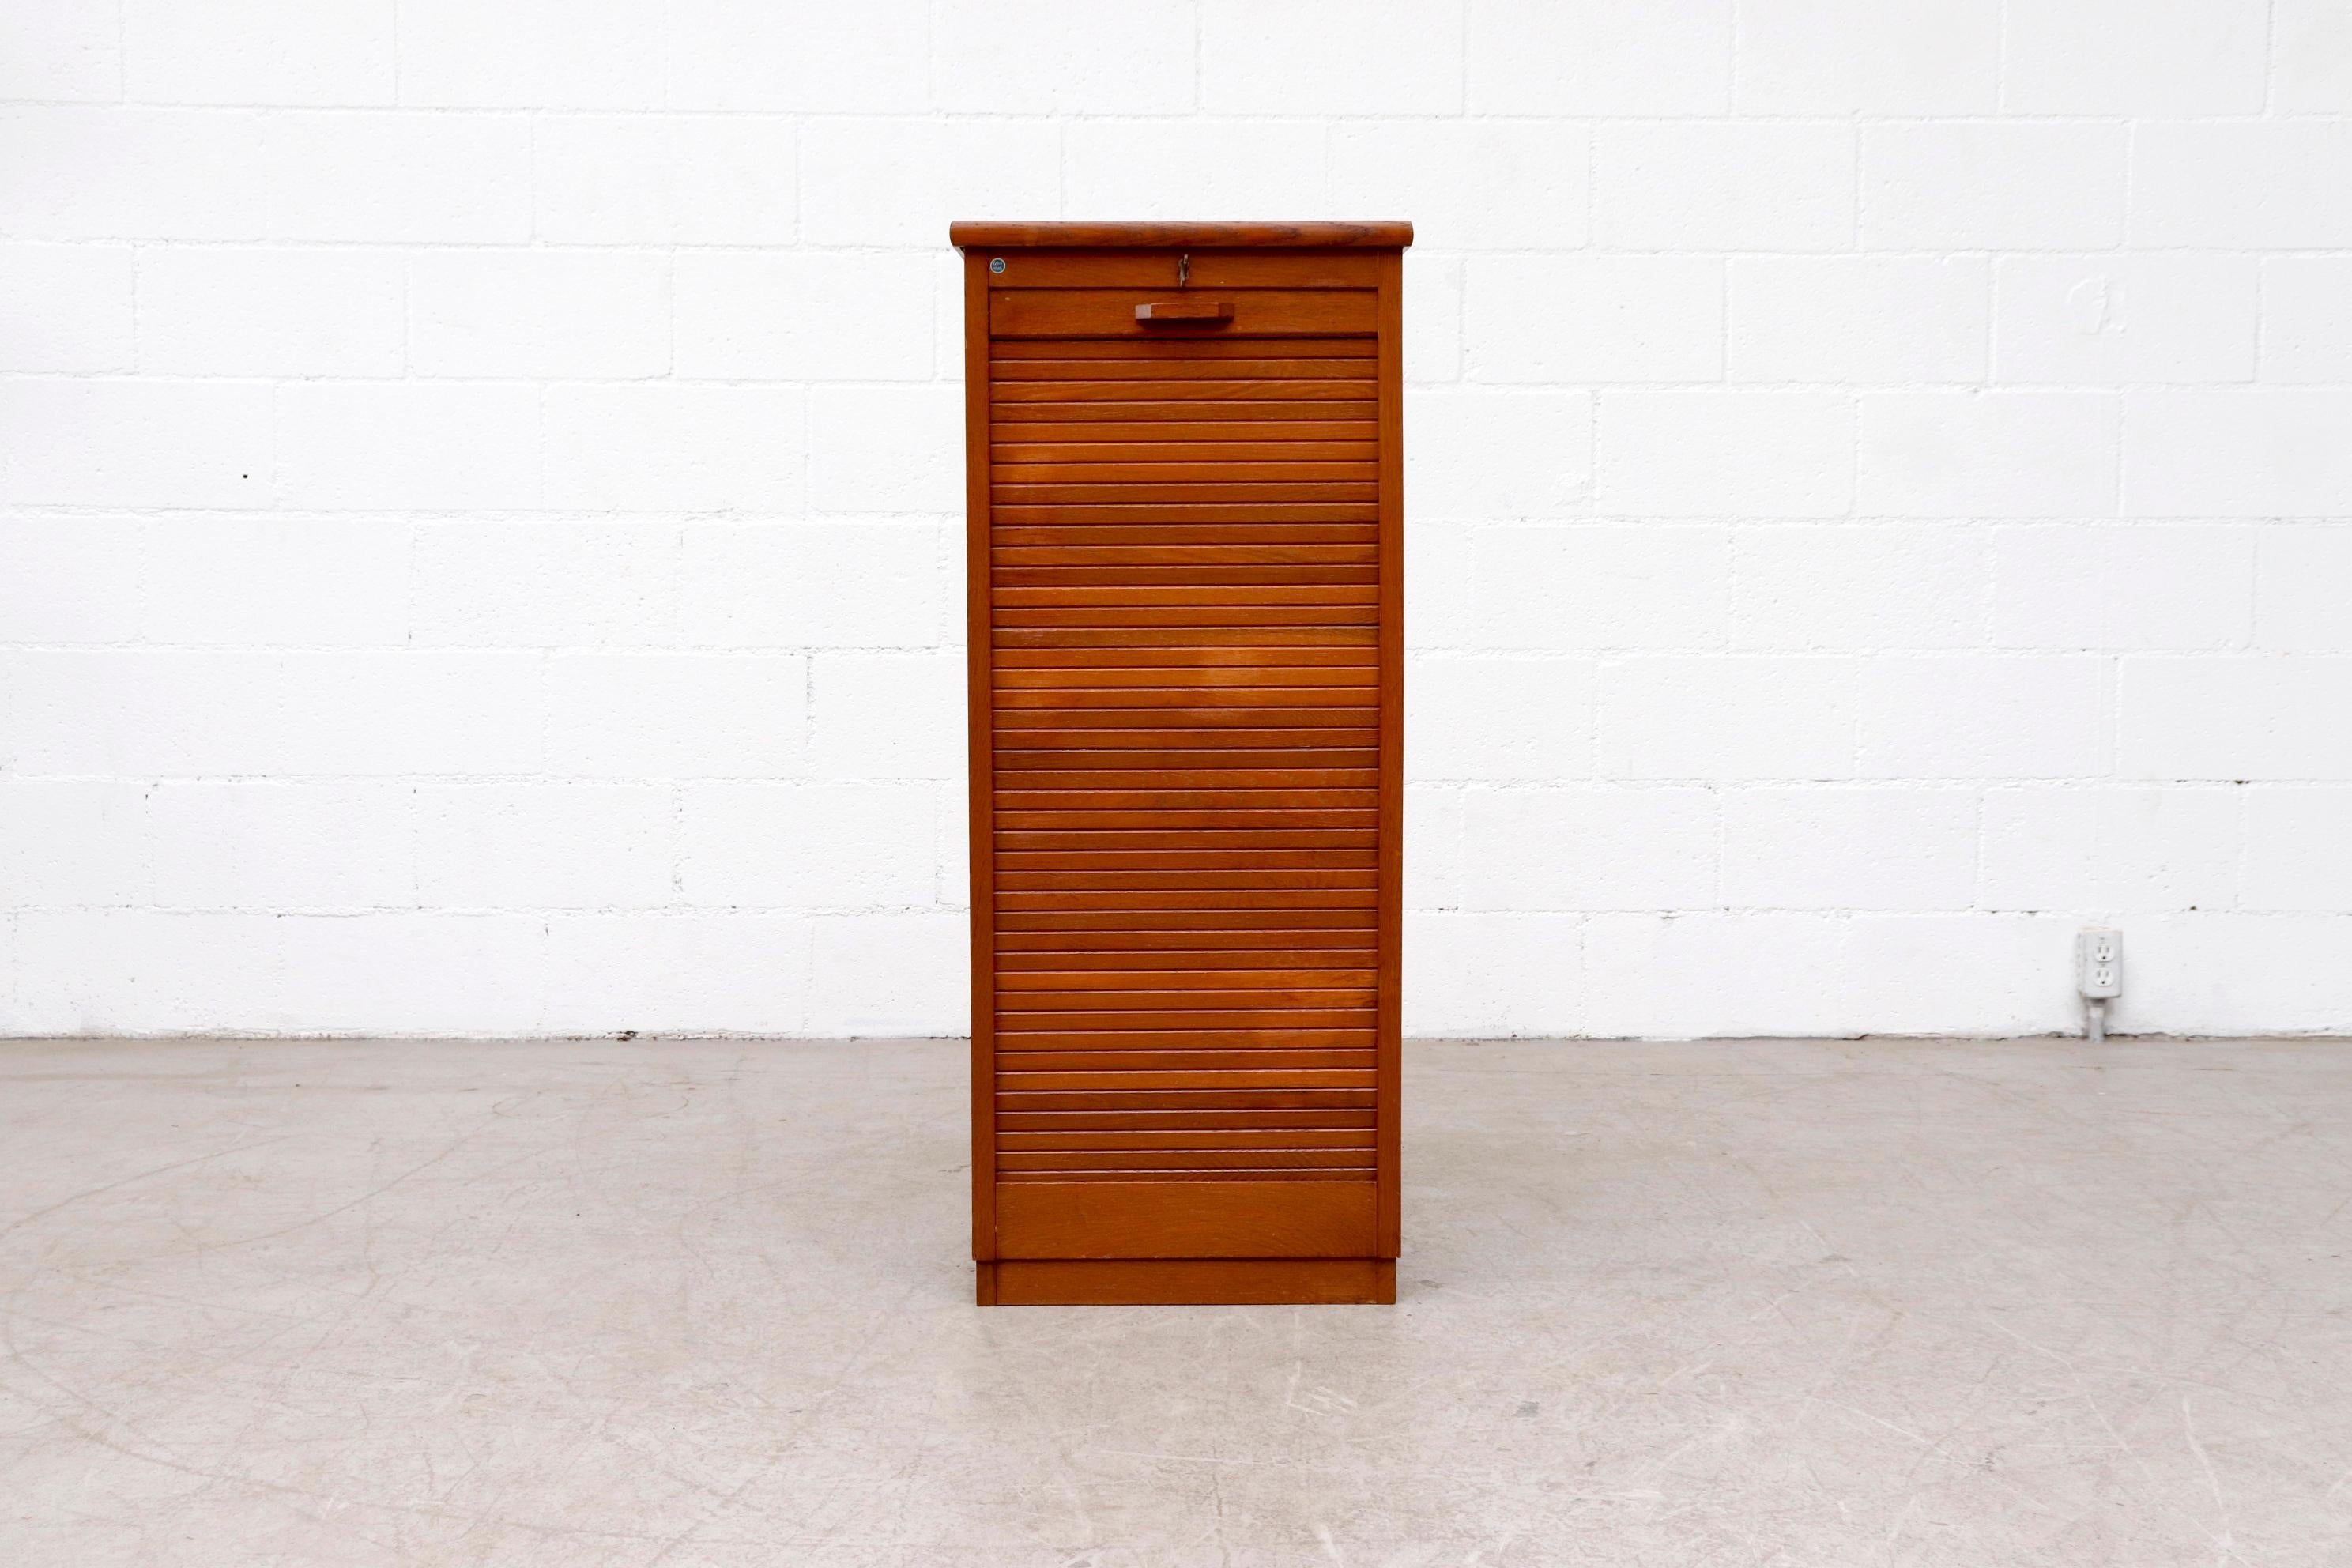 Tall, Mid-Century file cabinet with locking tambour door, stacking birch drawers and record (or magazine) storage inside. Manufactured in the post-war era by Dutch furniture making company Eeka. This piece is in good original condition with some age